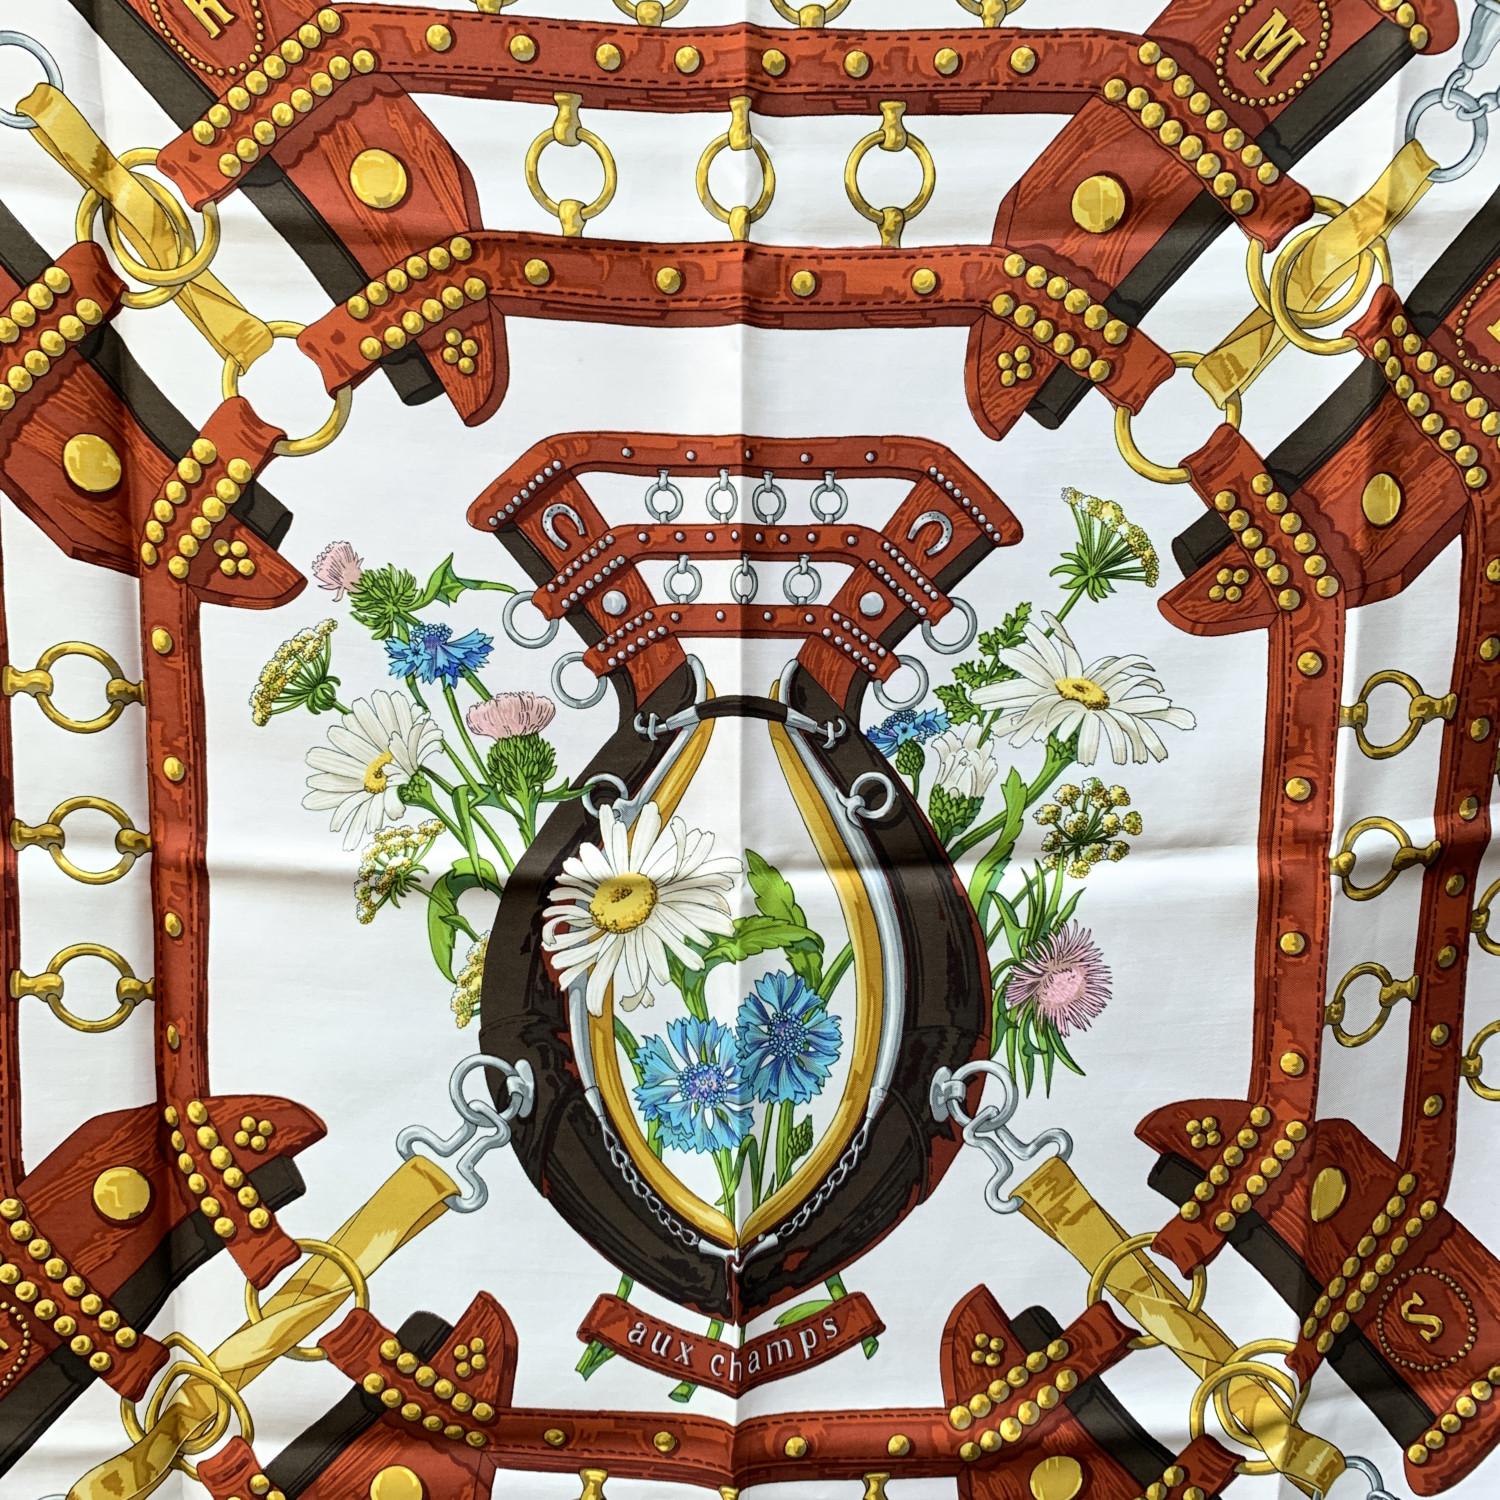 HERMES Silk scarf named 'Aux Champs', created by artist Cathy Latham, and first issued in 1970. 100% Silk. Hand rolled edges. Brown colorway. 'HERMES Paris' signature with copyright symbol is located in the center. Approx measurements: 35 x 35